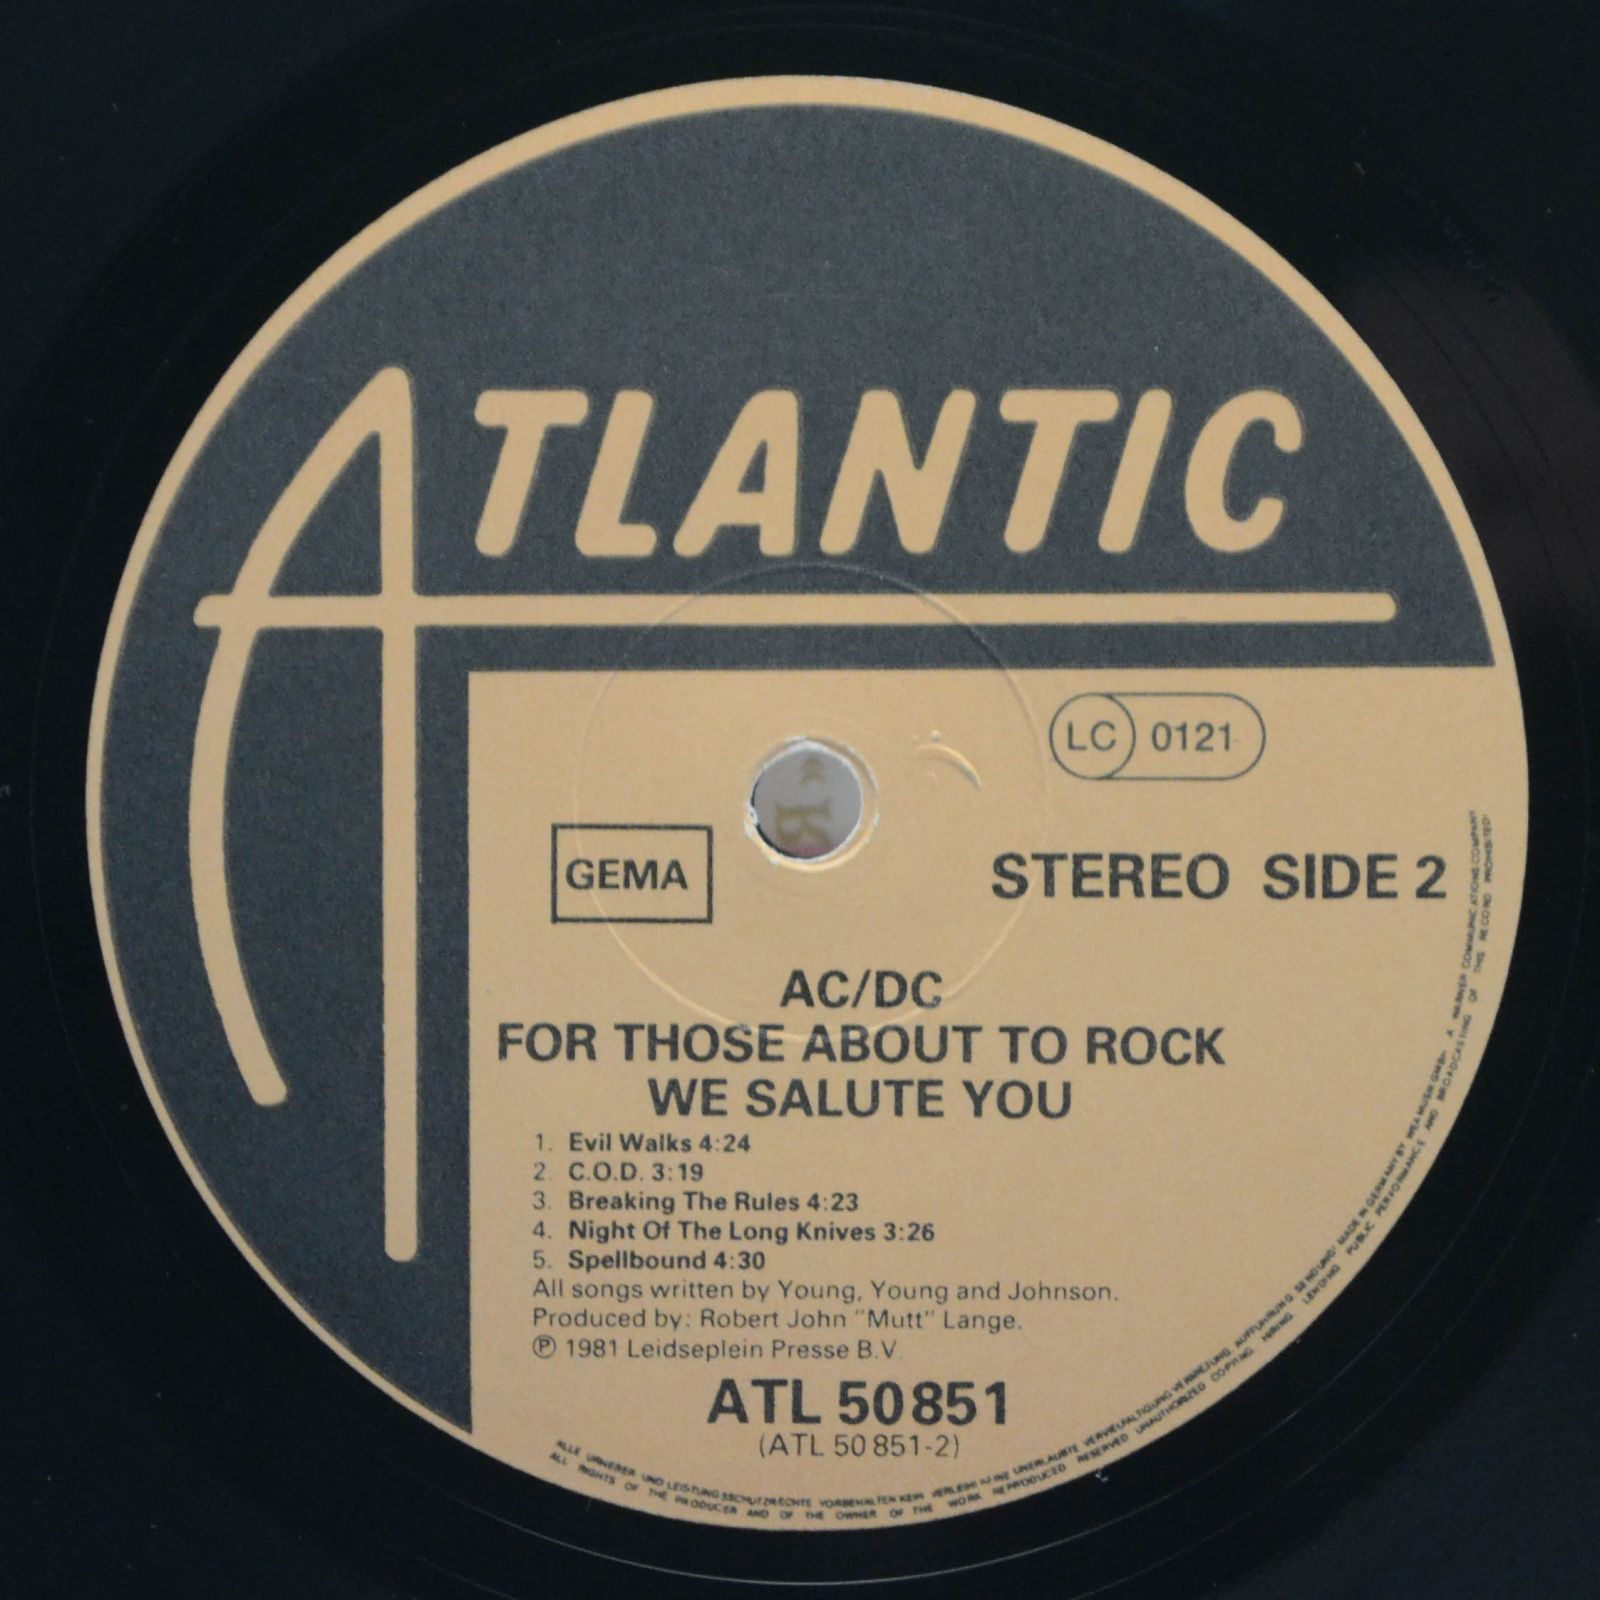 AC/DC — For Those About To Rock We Salute You, 1981